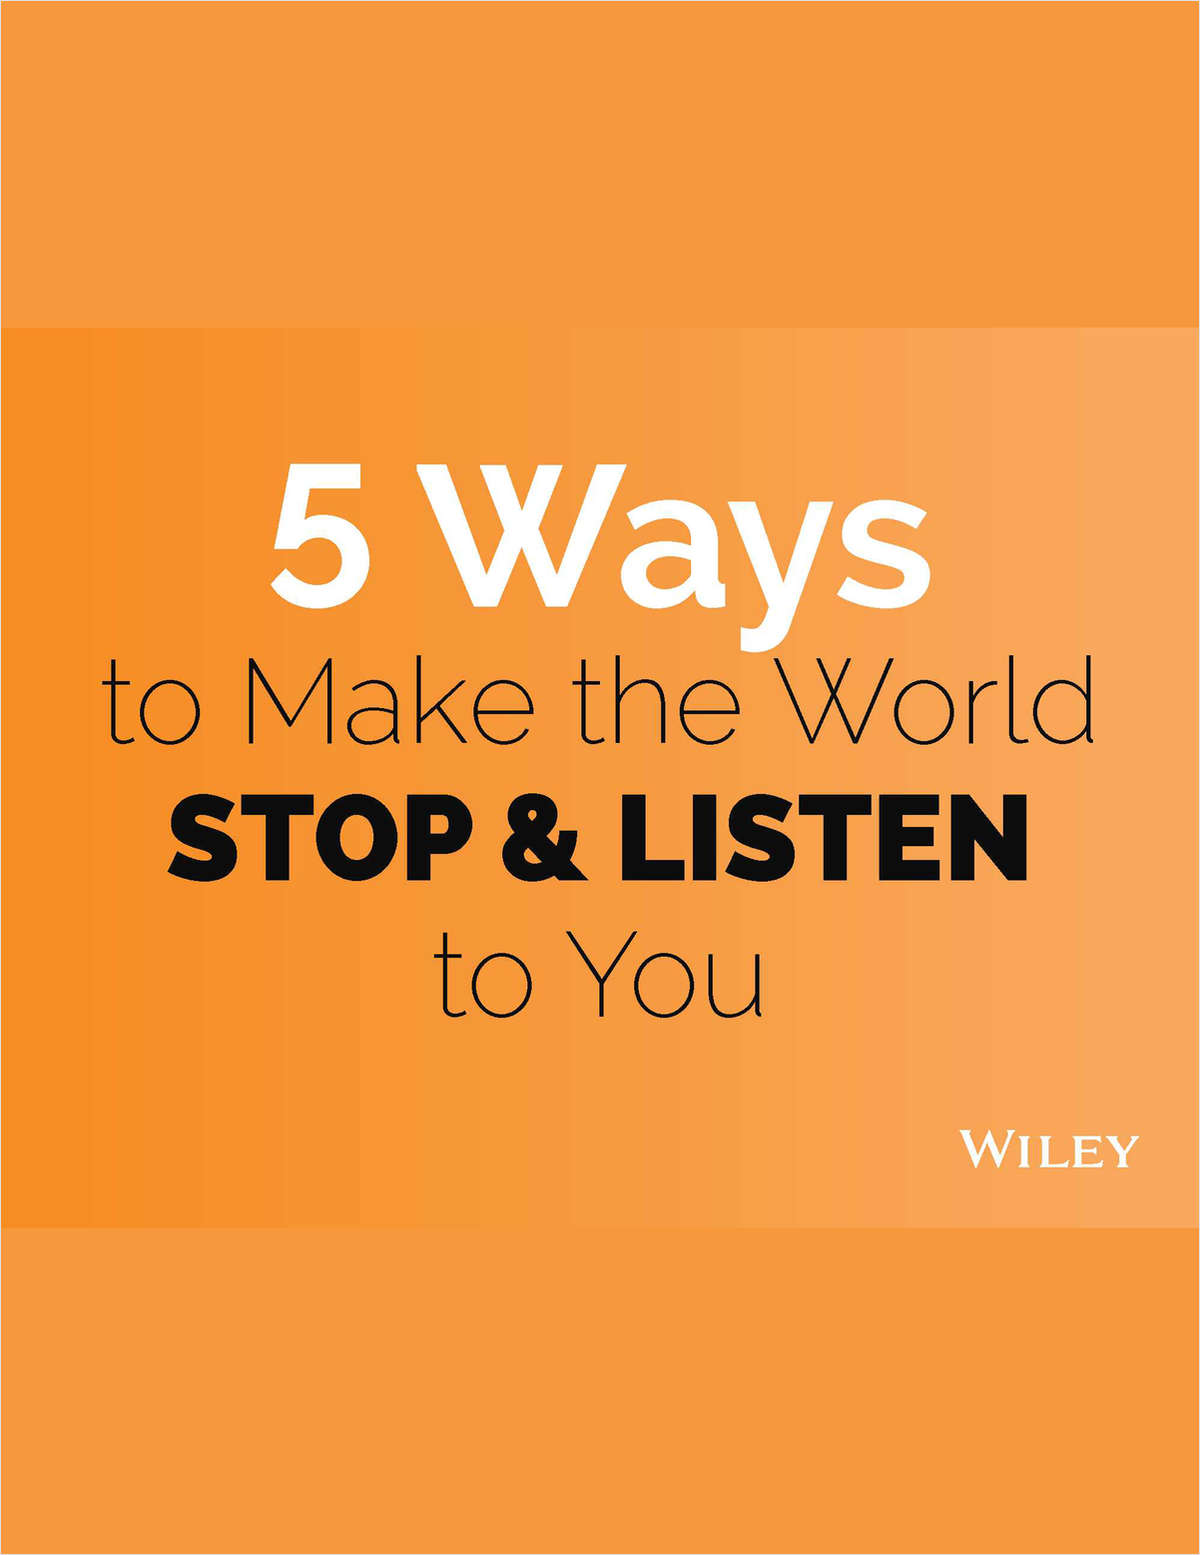 5 Ways to Make the World Stop & Listen to You